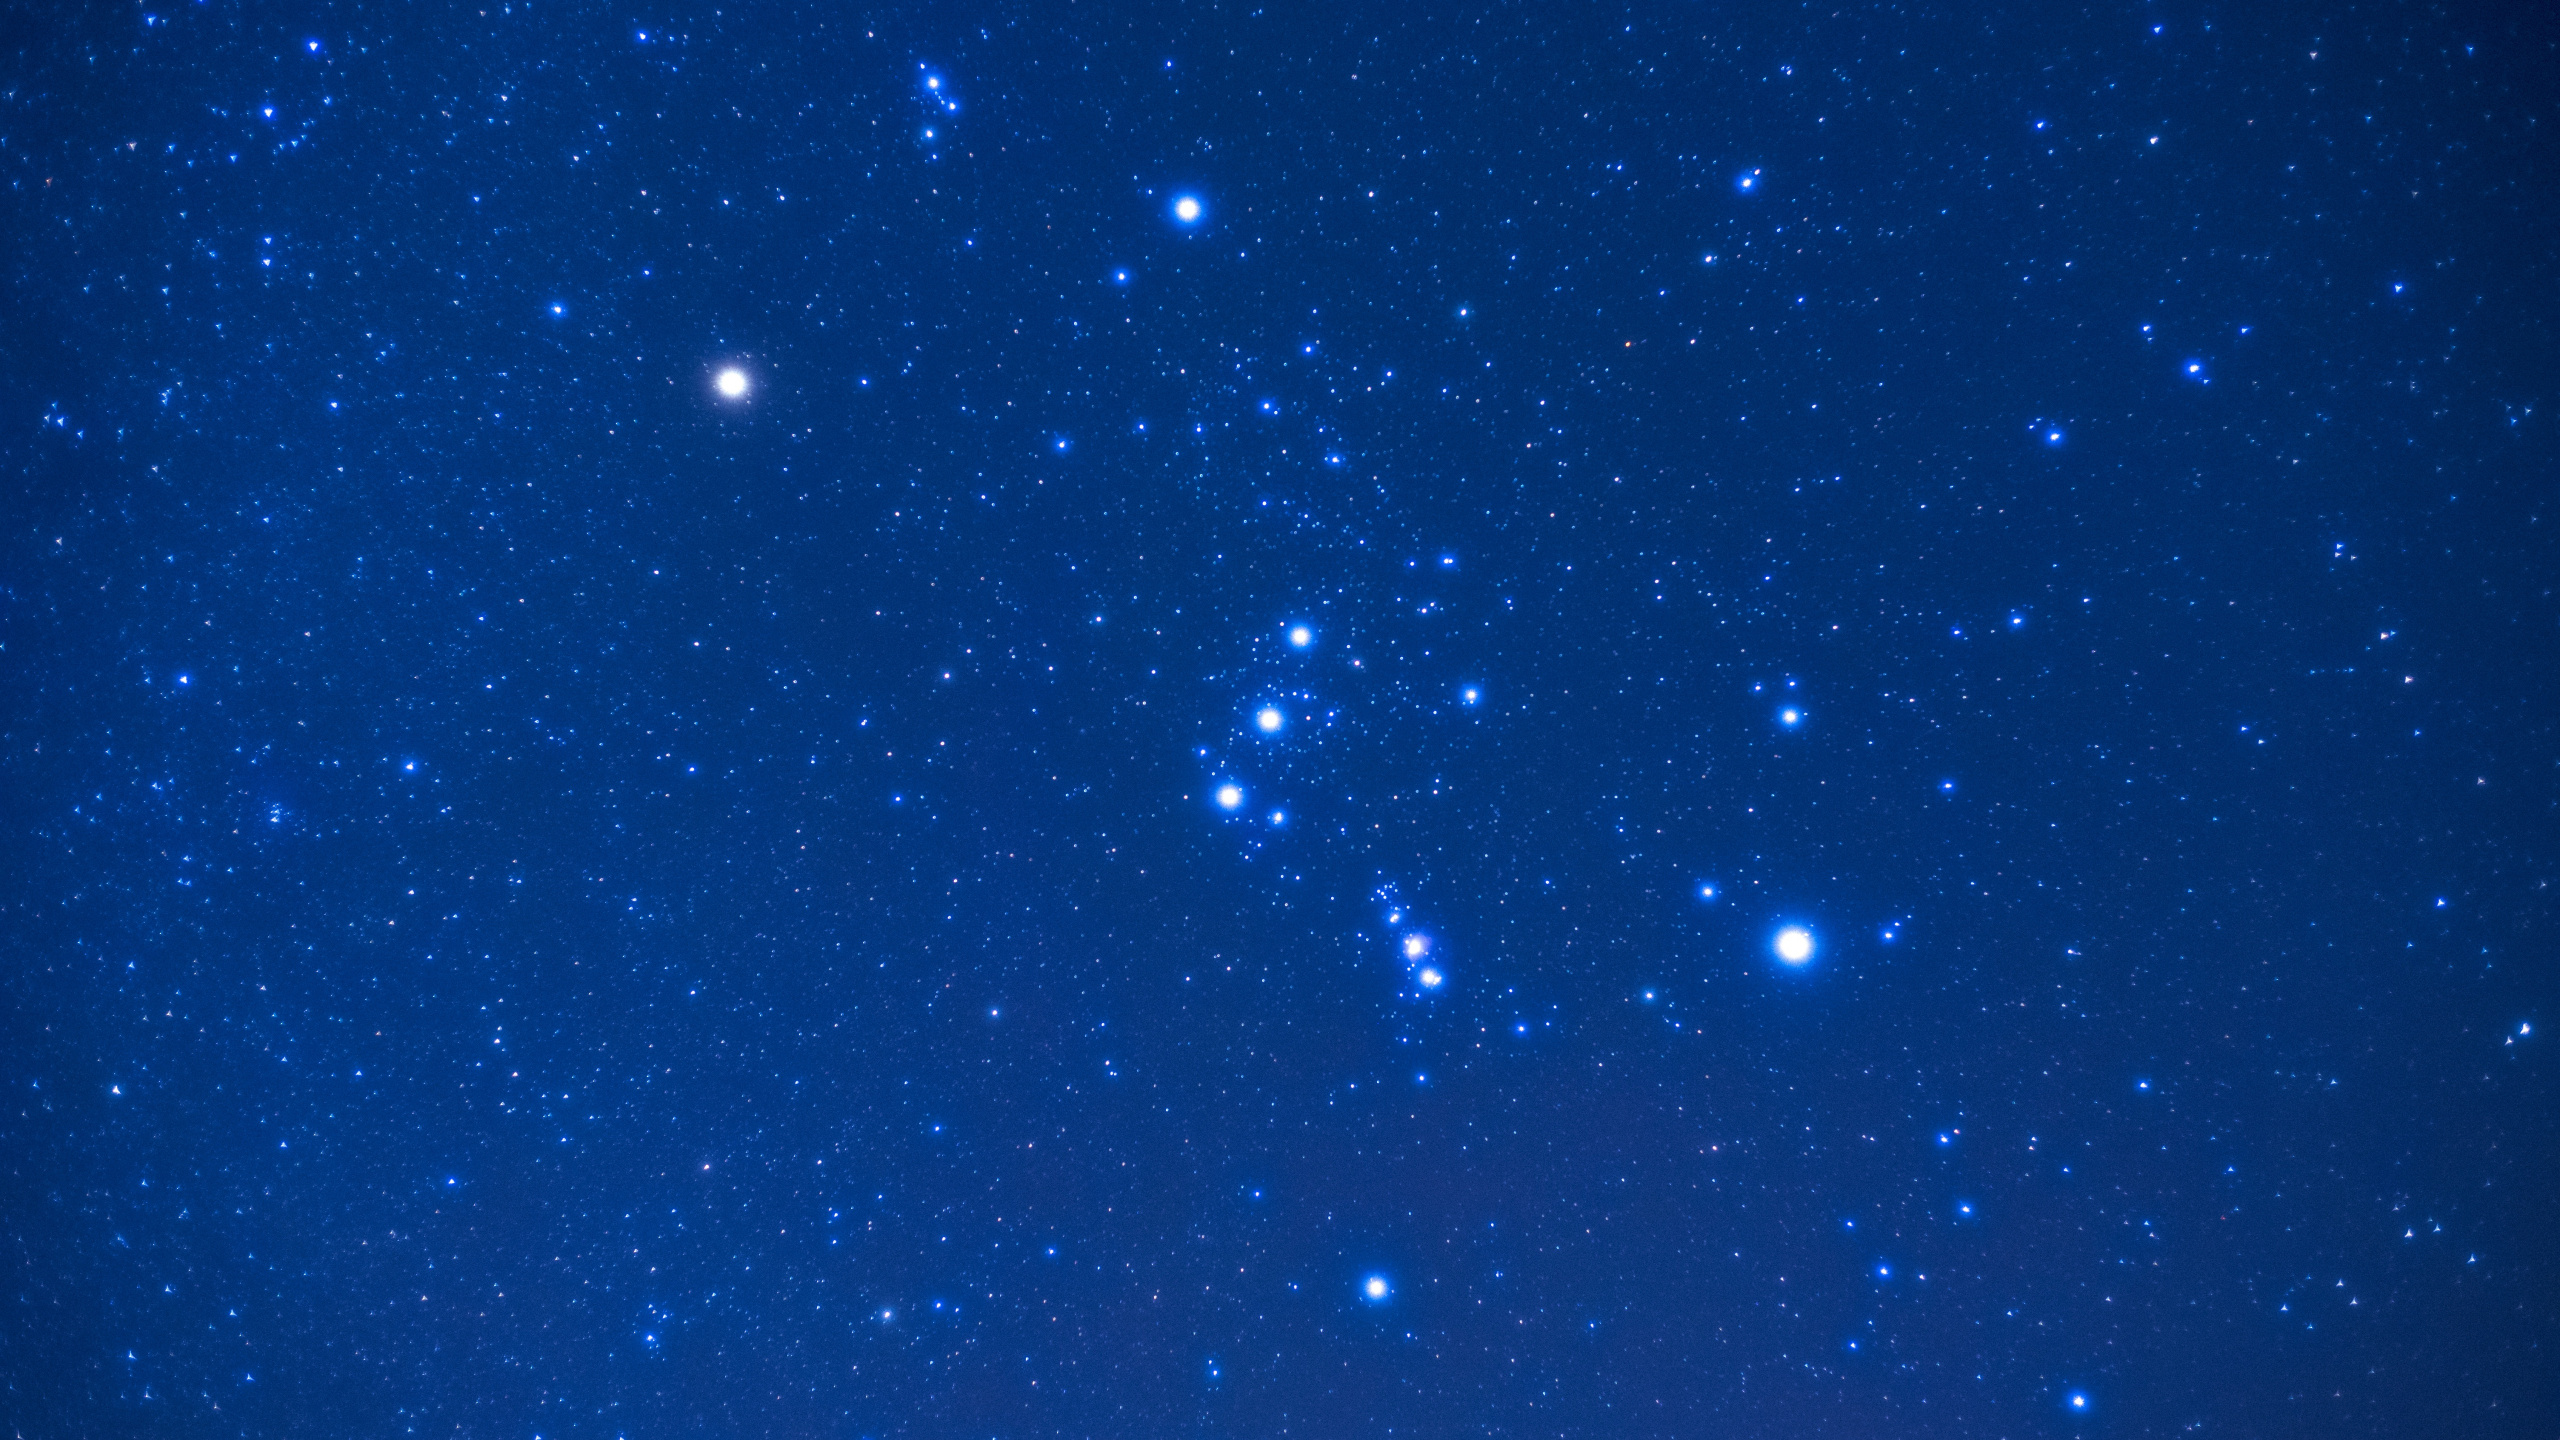 Blue and White Stars in Blue Sky. Wallpaper in 2560x1440 Resolution